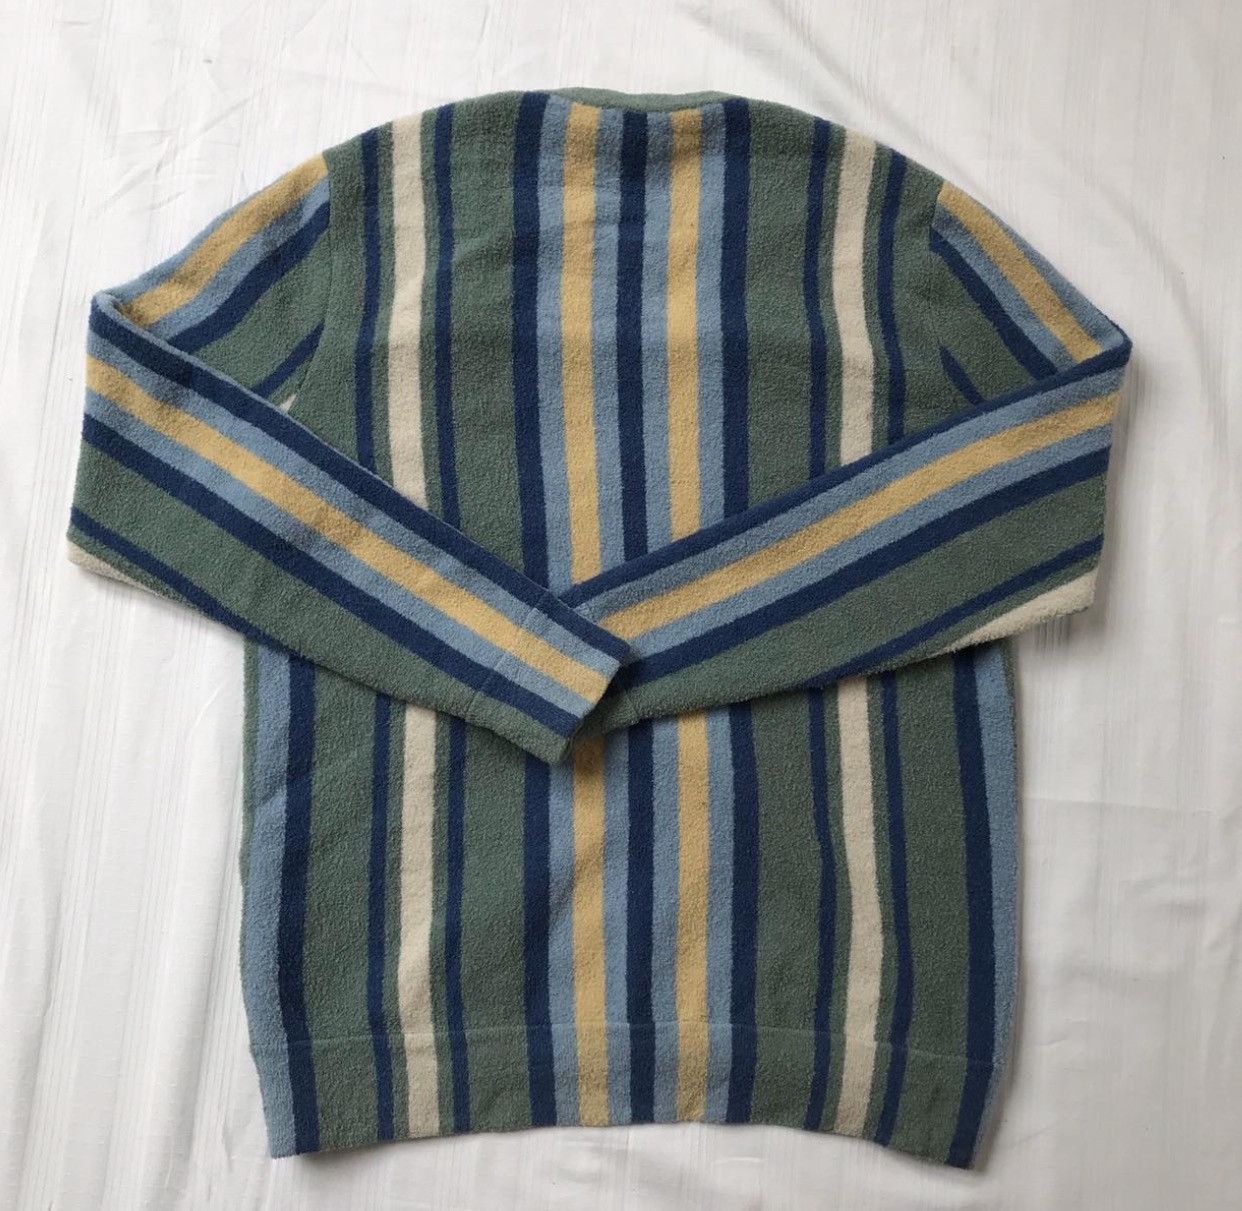 Acne Studios RARE GRAIL acne studios brushed terry sweater Size US M / EU 48-50 / 2 - 2 Preview